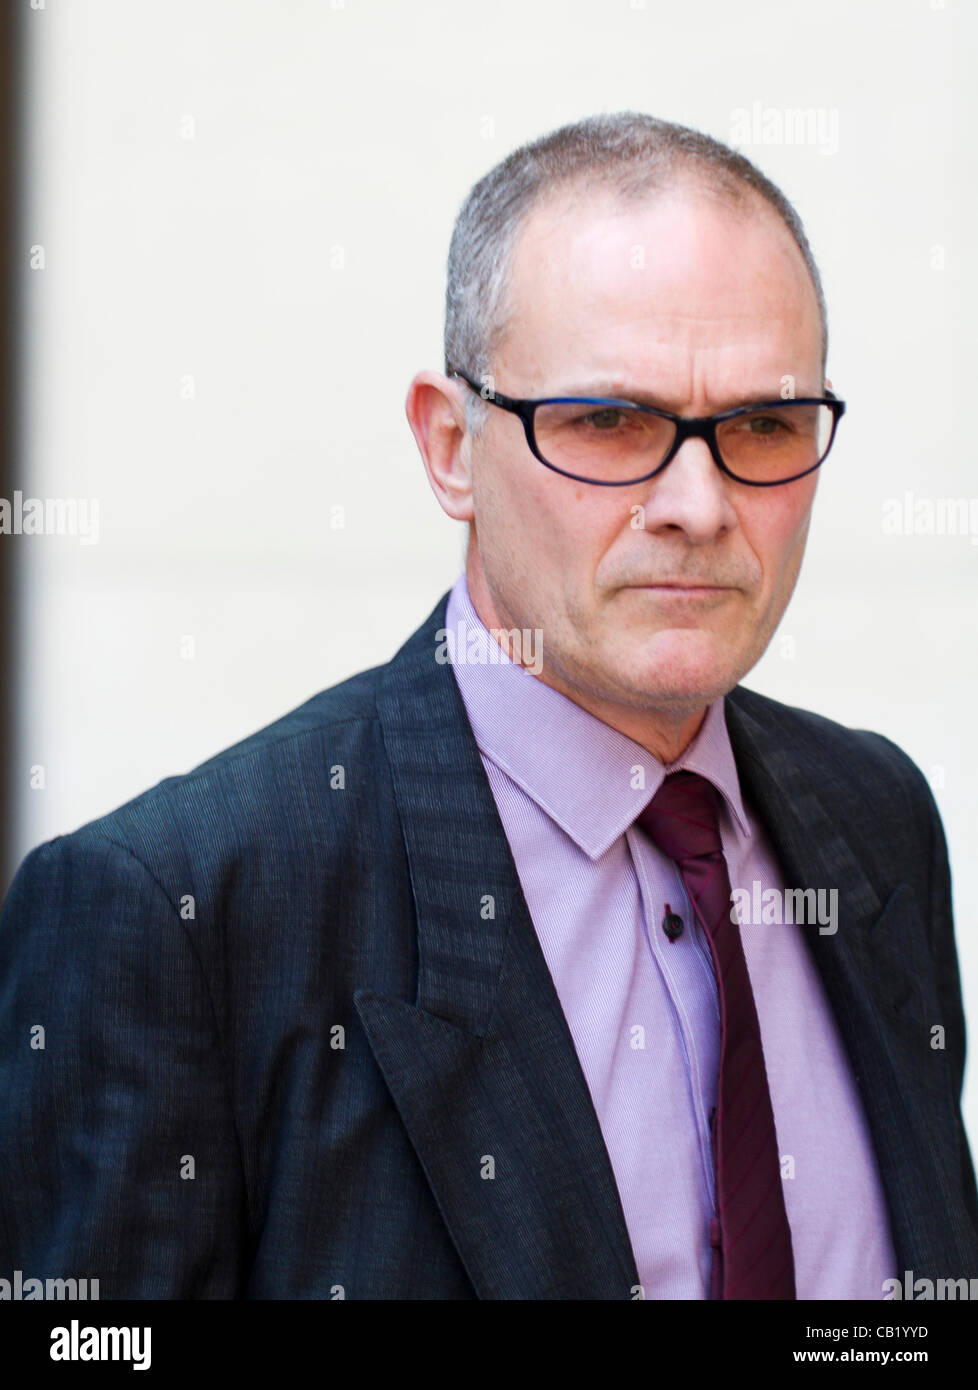 London, UK. 22nd May 2012. PC Alex MacFarlane leaves Westminster Magistrates Court, London. PC Alex MacFarlane allegedly racially abused a black man during last summer's riots.PLEASE NOTE NAME SPELLING HAS BEEN CORRECTED FROM PREVIOUS. Stock Photo